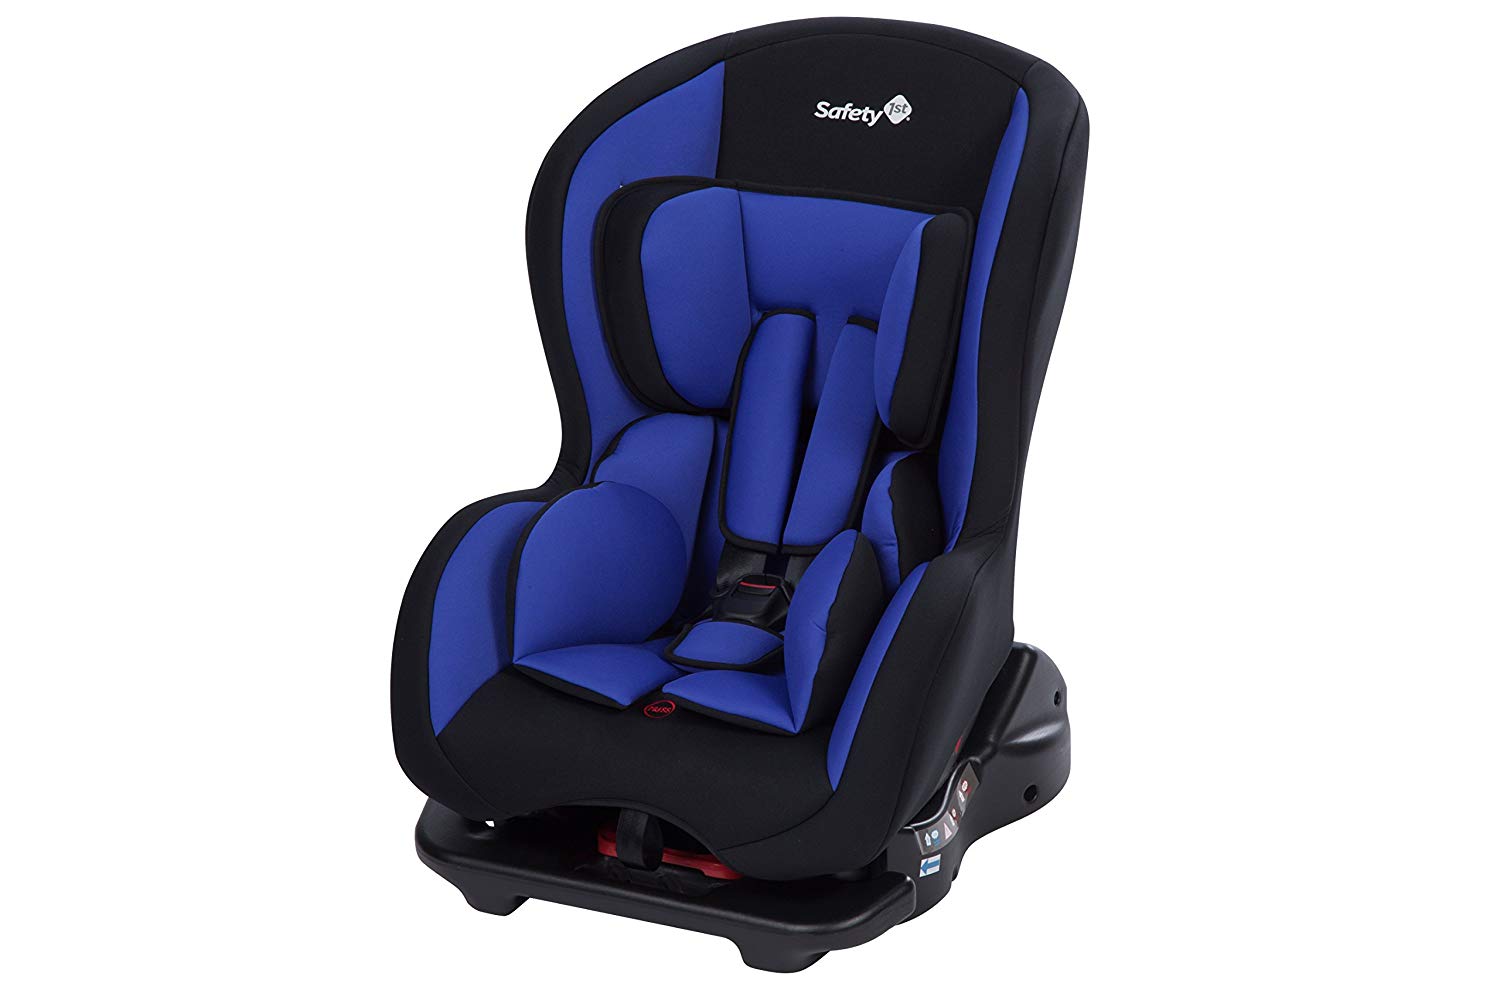 Safety 1st Sweet Safe 8015884000 Safe Child Car Seat Group 0 / 1 Forwards (Approx. 4 Years to 18 kg) Blue